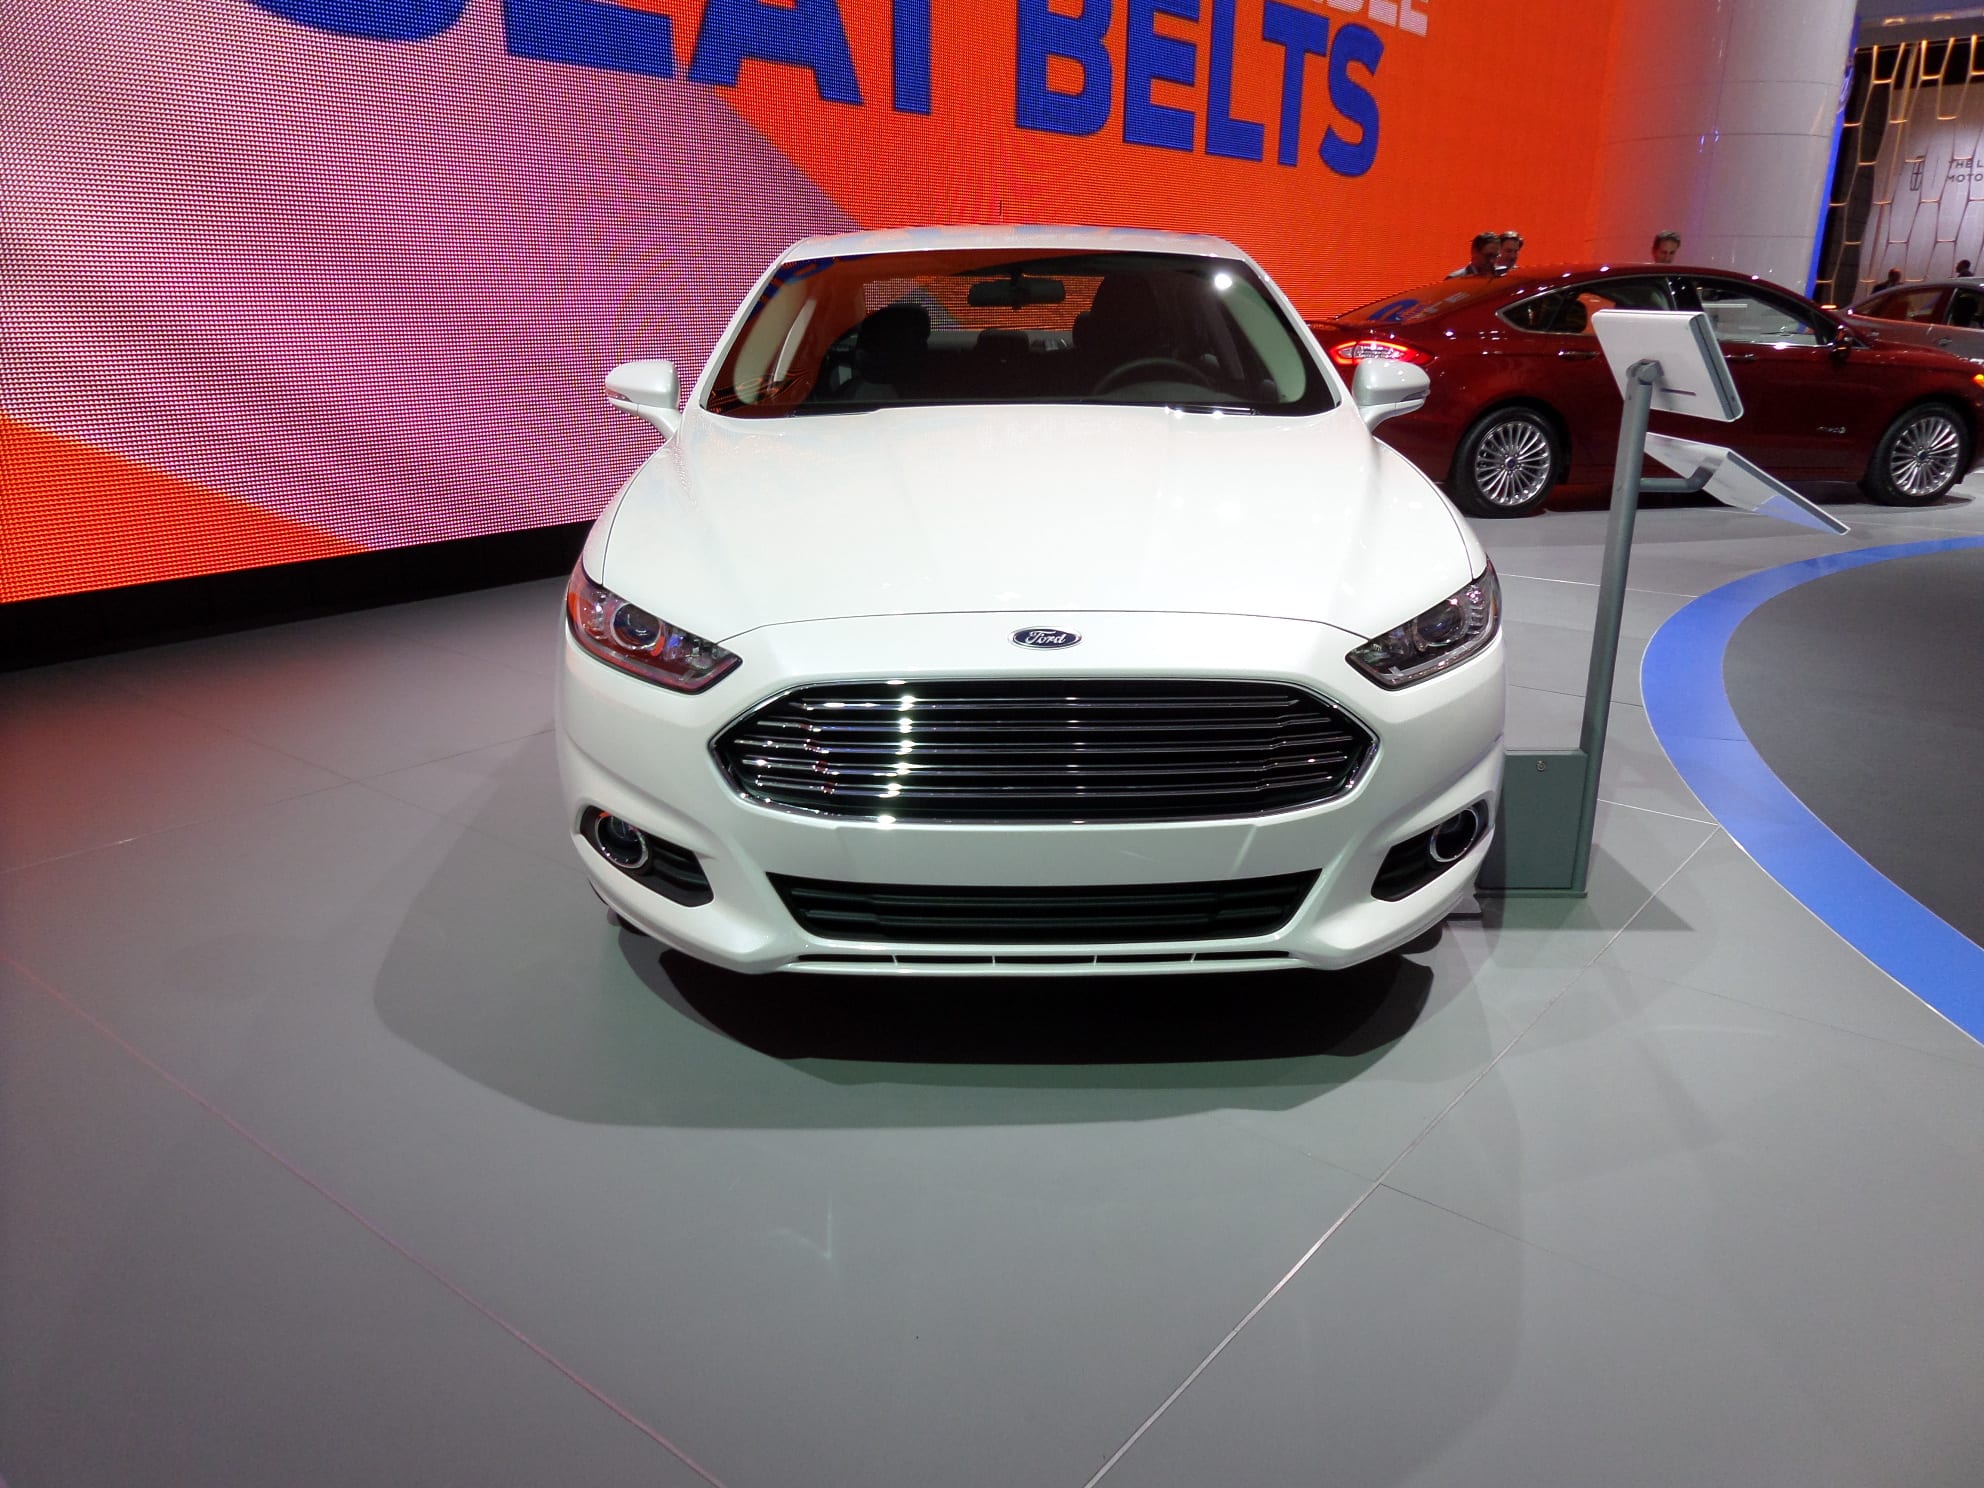 White 2014 Ford Fusion. Front view.